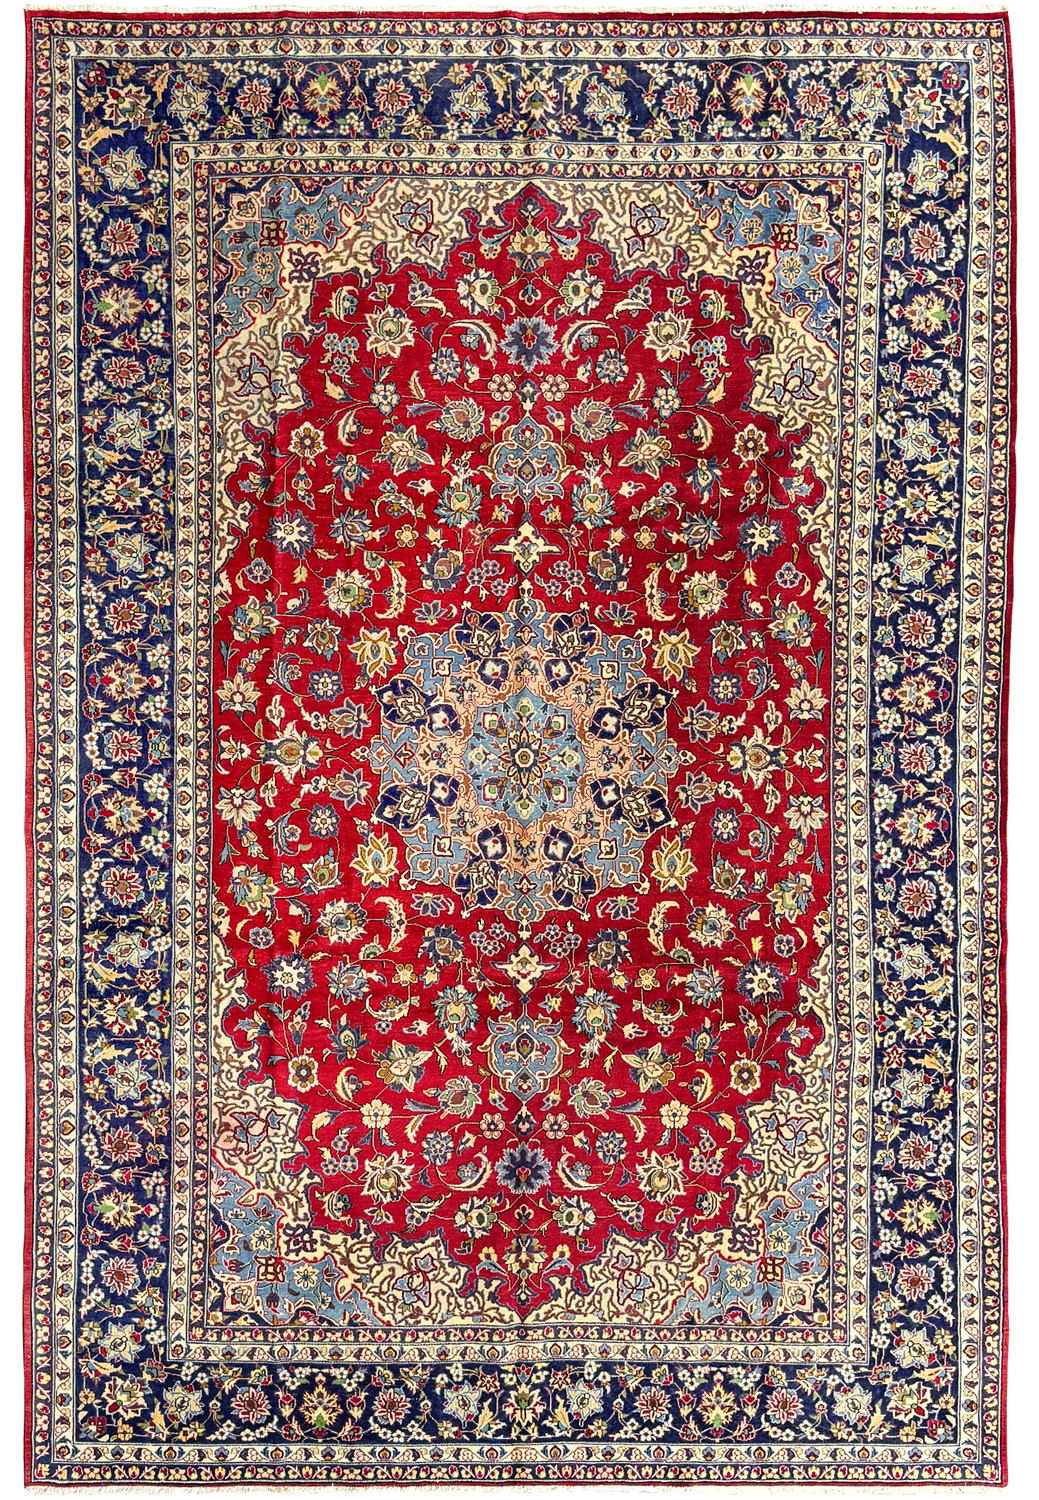 An overhead view of a traditional Persian Isfahan rug with a deep crimson field and a central floral medallion surrounded by intricate designs and motifs in indigo, cream, and gold, with a detailed navy blue borde